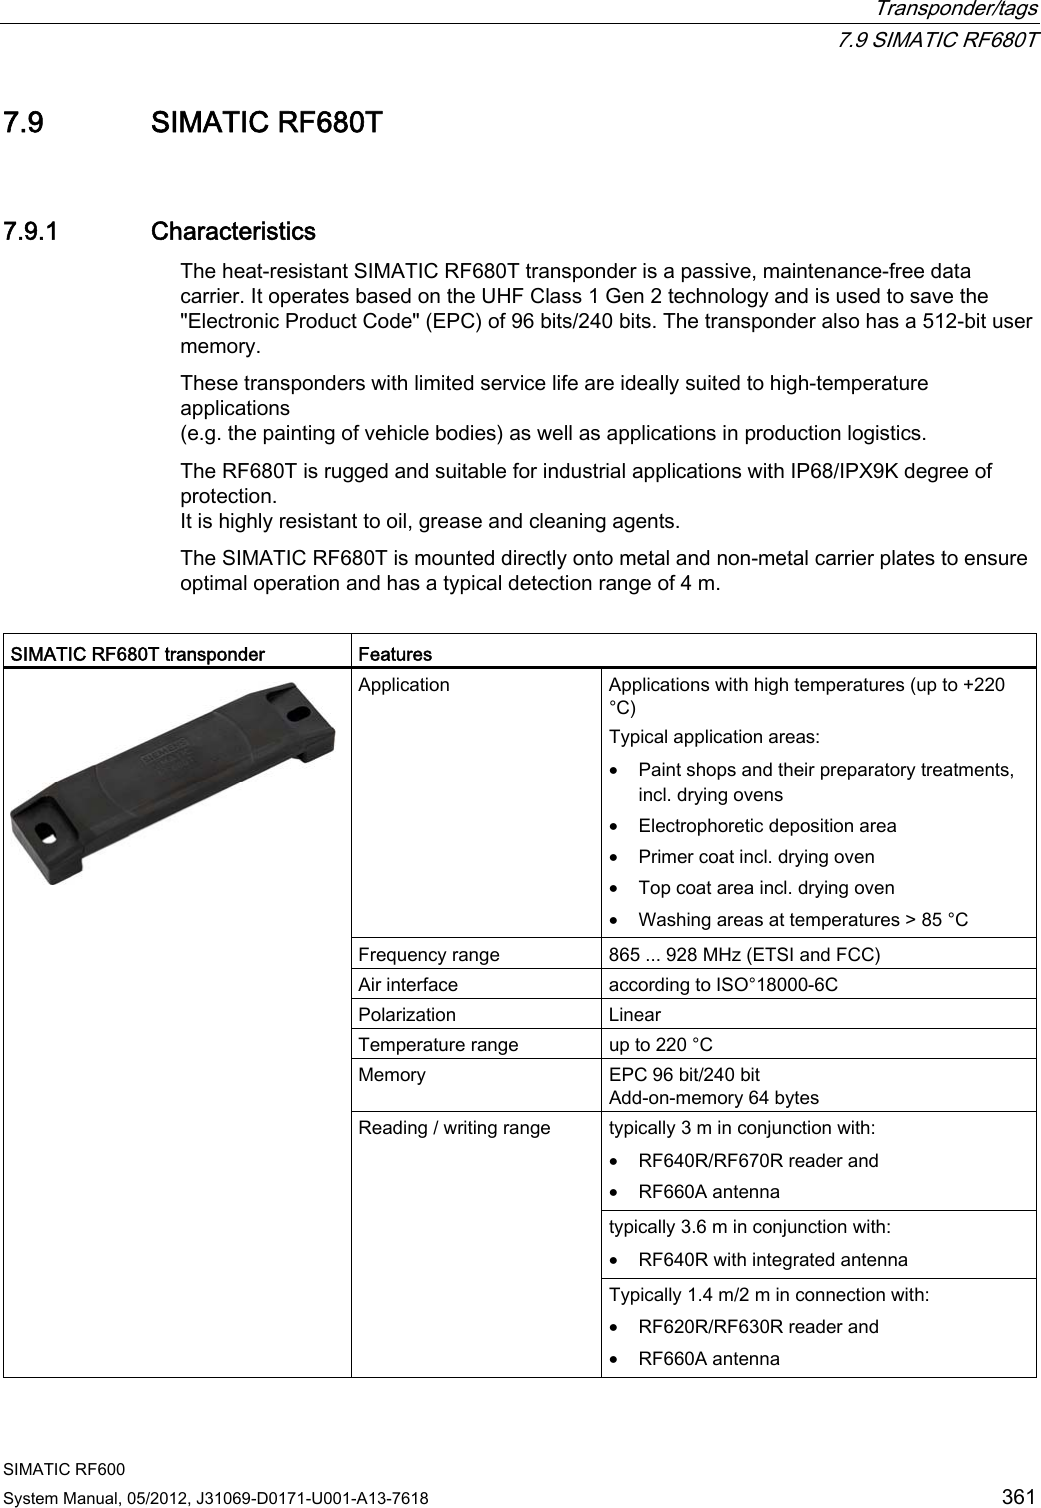  Transponder/tags  7.9 SIMATIC RF680T SIMATIC RF600 System Manual, 05/2012, J31069-D0171-U001-A13-7618  361 7.9 SIMATIC RF680T 7.9.1 Characteristics The heat-resistant SIMATIC RF680T transponder is a passive, maintenance-free data carrier. It operates based on the UHF Class 1 Gen 2 technology and is used to save the &quot;Electronic Product Code&quot; (EPC) of 96 bits/240 bits. The transponder also has a 512-bit user memory. These transponders with limited service life are ideally suited to high-temperature applications  (e.g. the painting of vehicle bodies) as well as applications in production logistics.  The RF680T is rugged and suitable for industrial applications with IP68/IPX9K degree of protection.  It is highly resistant to oil, grease and cleaning agents.  The SIMATIC RF680T is mounted directly onto metal and non-metal carrier plates to ensure optimal operation and has a typical detection range of 4 m.  SIMATIC RF680T transponder  Features Application  Applications with high temperatures (up to +220 °C) Typical application areas: • Paint shops and their preparatory treatments, incl. drying ovens • Electrophoretic deposition area • Primer coat incl. drying oven • Top coat area incl. drying oven • Washing areas at temperatures &gt; 85 °C Frequency range  865 ... 928 MHz (ETSI and FCC) Air interface  according to ISO°18000-6C Polarization   Linear Temperature range  up to 220 °C Memory  EPC 96 bit/240 bit Add-on-memory 64 bytes typically 3 m in conjunction with: • RF640R/RF670R reader and • RF660A antenna typically 3.6 m in conjunction with: • RF640R with integrated antenna  Reading / writing range Typically 1.4 m/2 m in connection with: • RF620R/RF630R reader and • RF660A antenna 